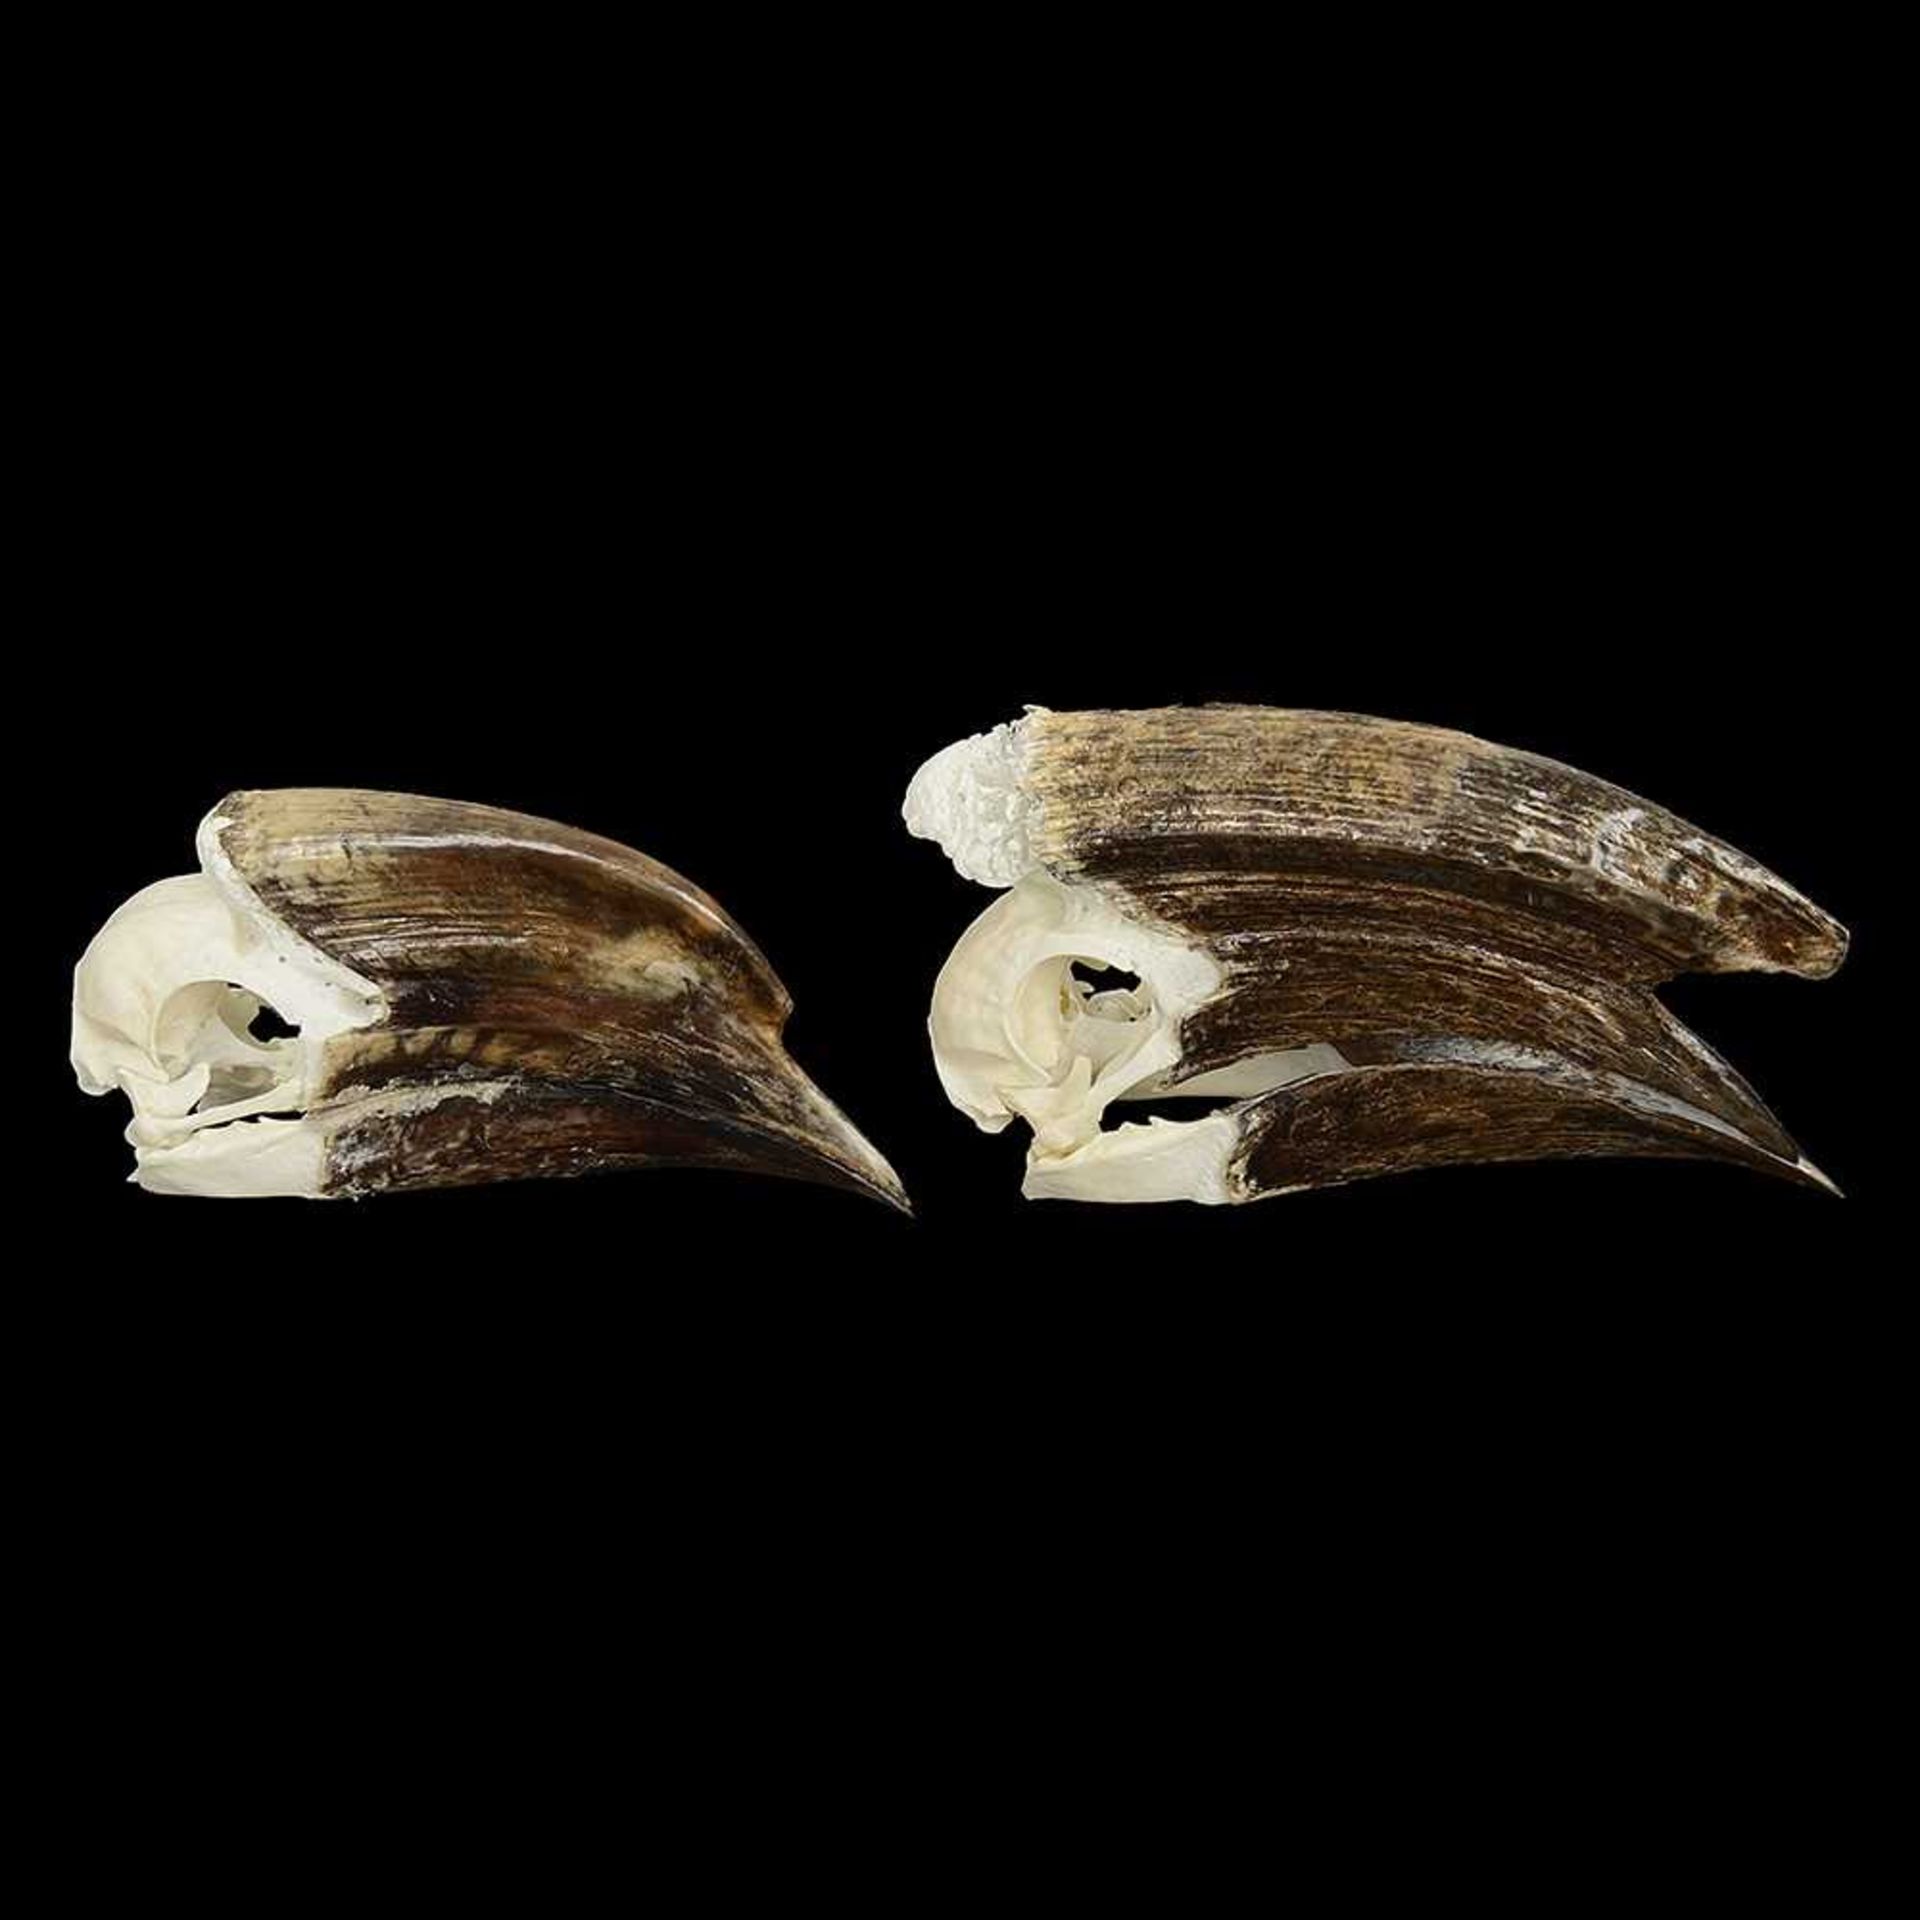 THE SKULLS OF A MALE AND FEMALE TRUMPETER HORNBILL (BYCANISTES BUCINATOR)